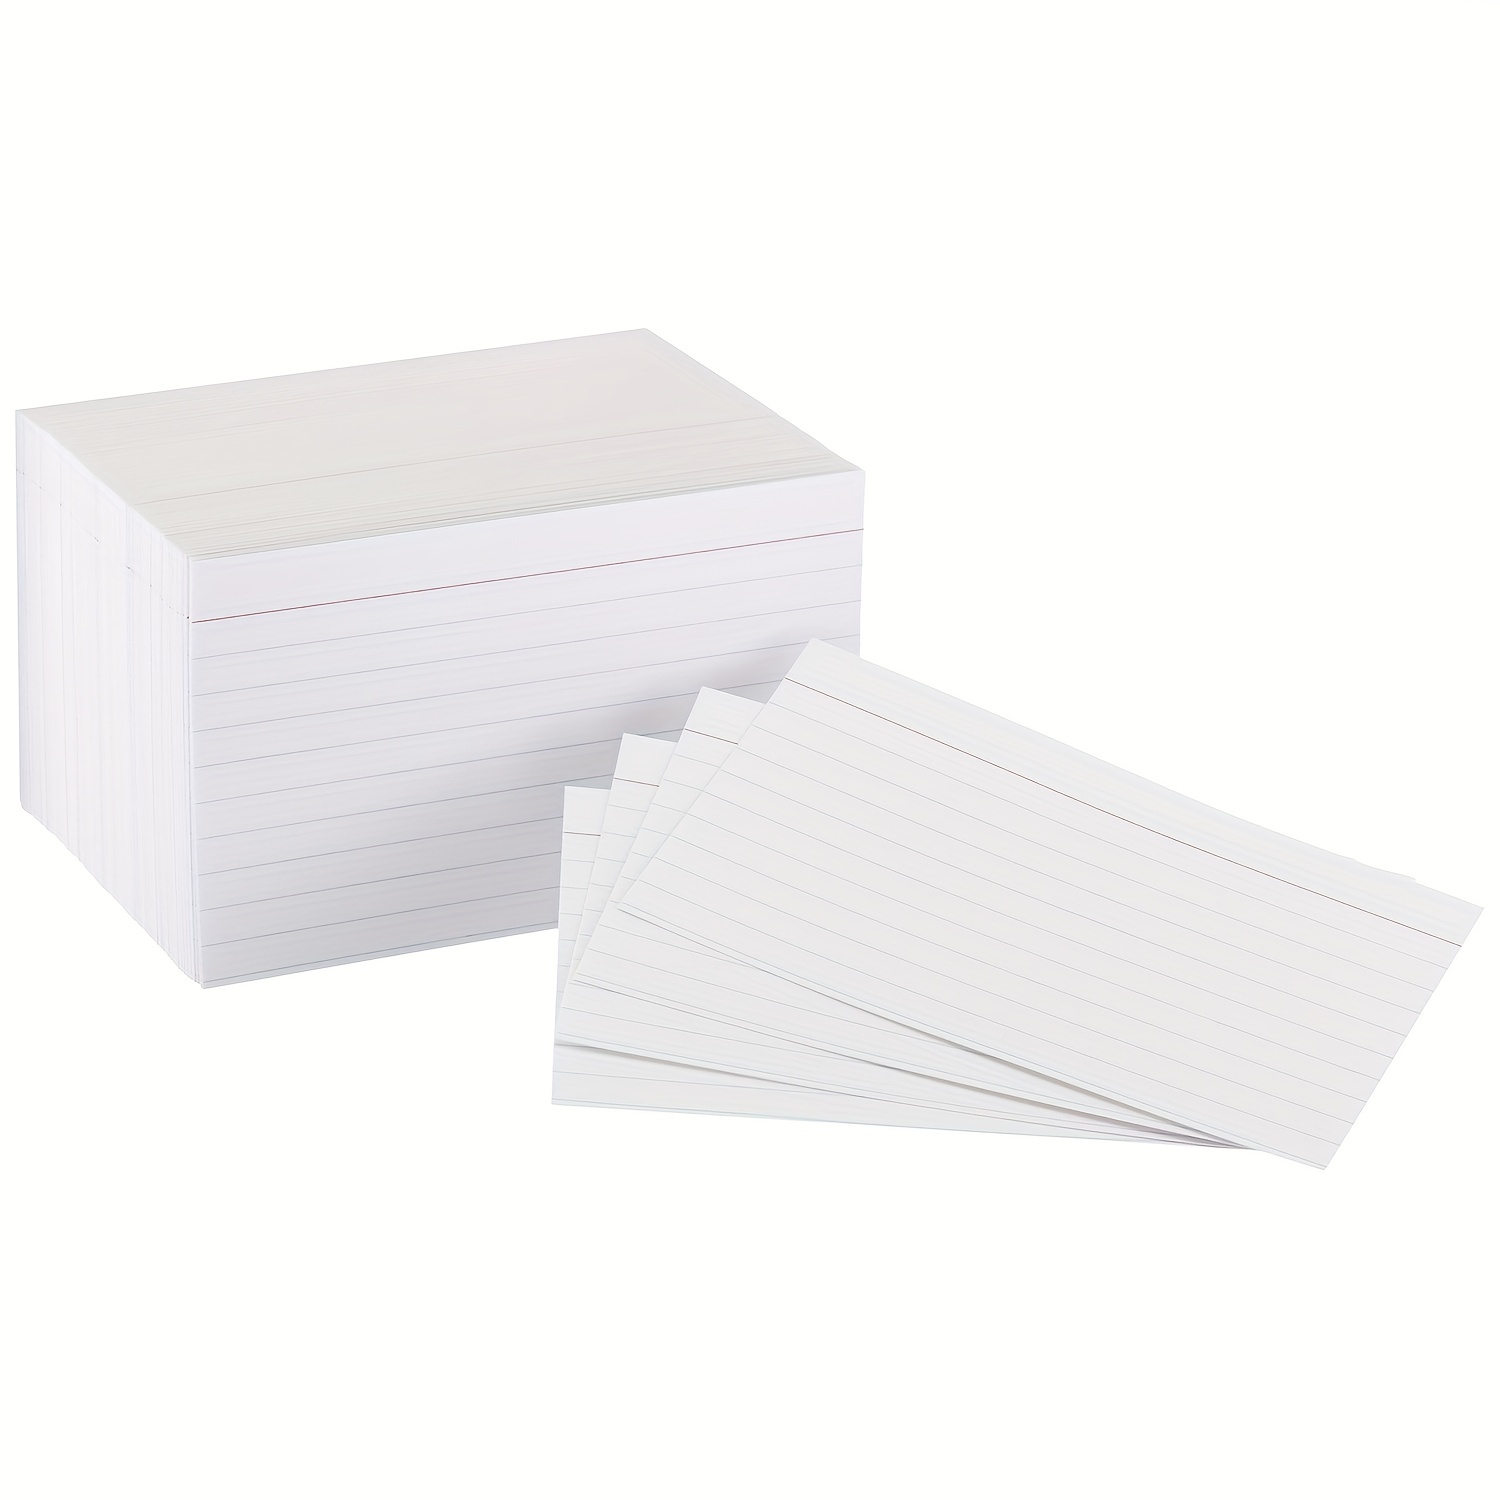 Ruled Flash Cards/Index Cards,White Card Stock,4 x 6 Inches, 100 Cards in  This Pack - Imprint